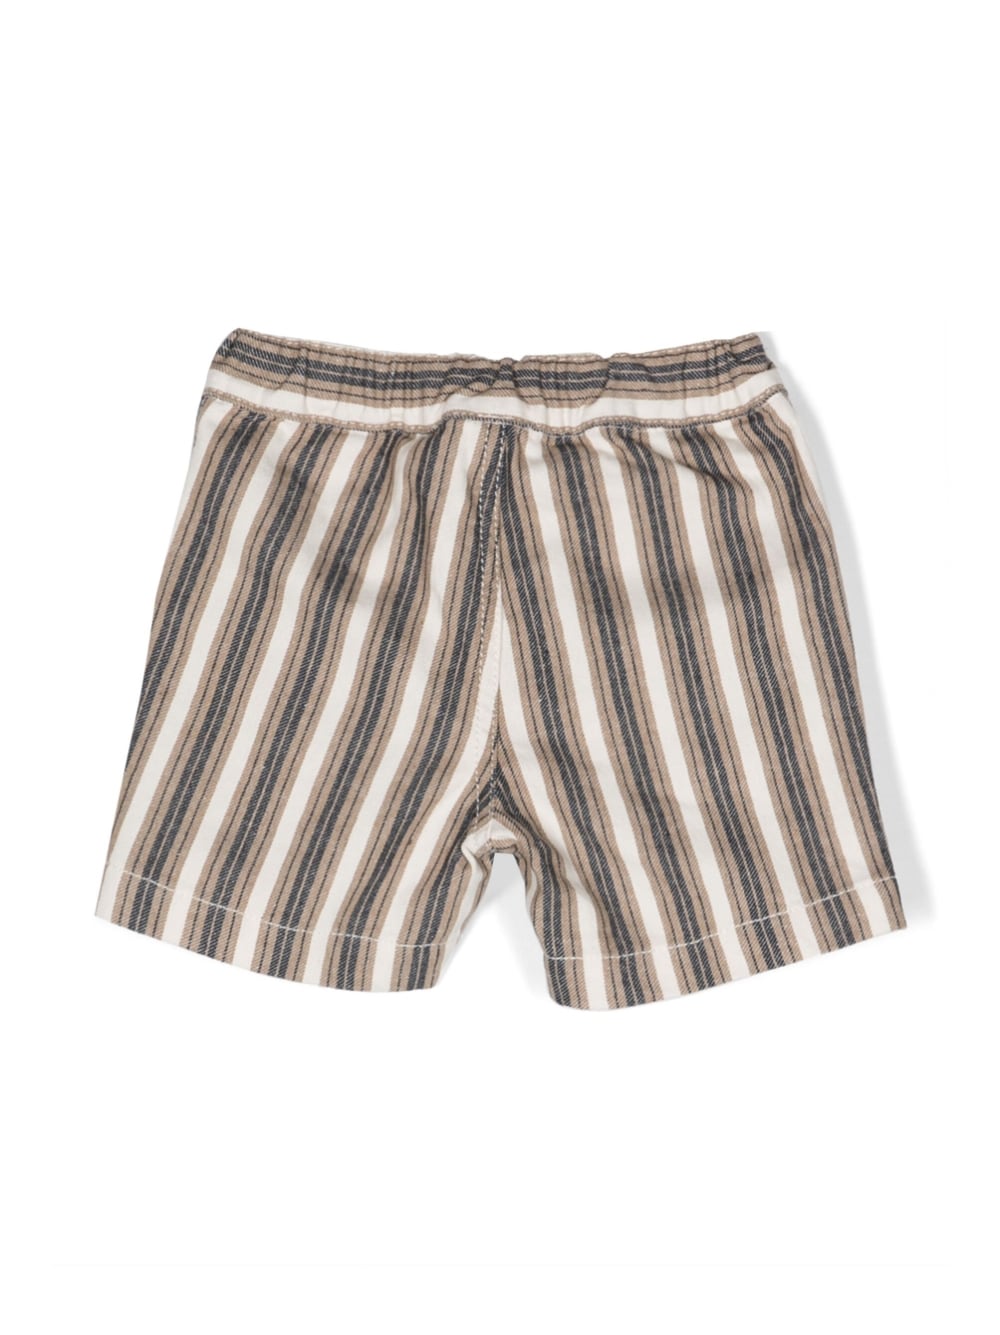 Beige and brown shorts for newborns